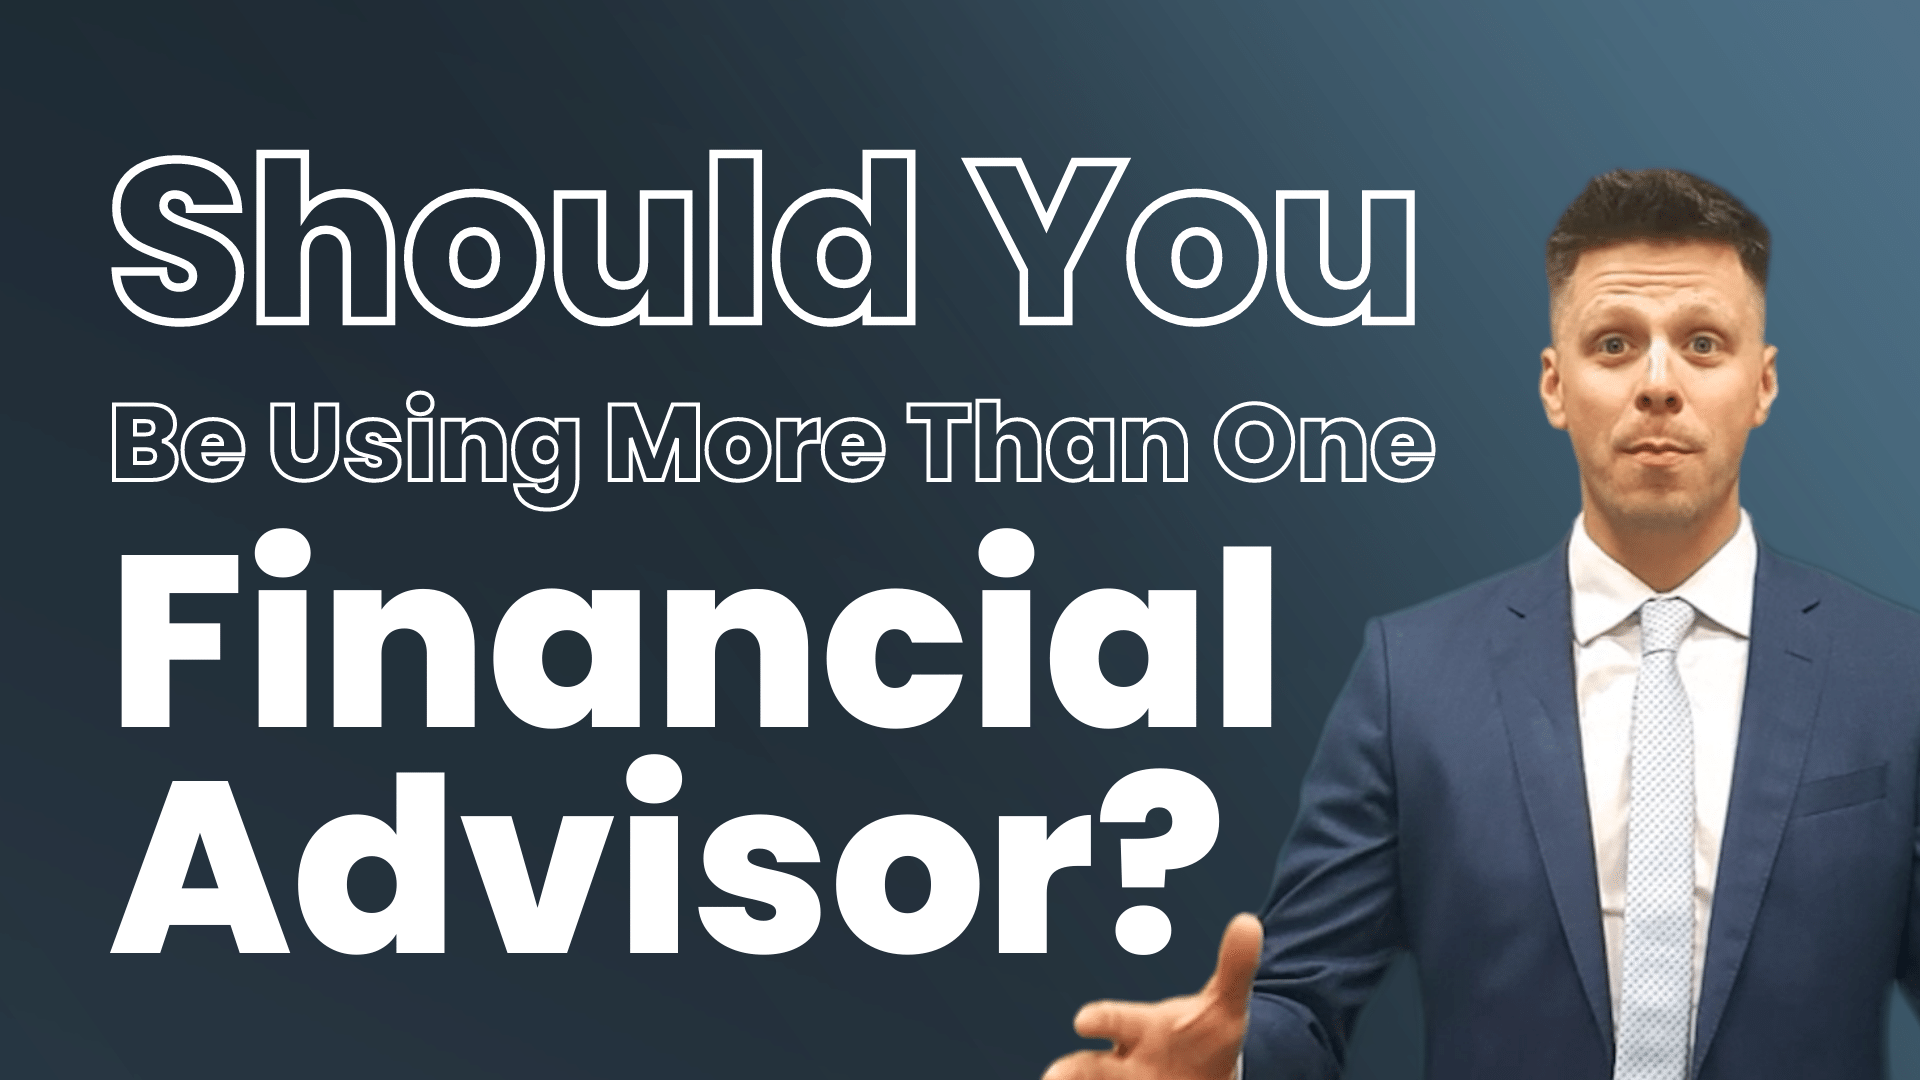 Should You Be Using More Than One Financial Advisor?